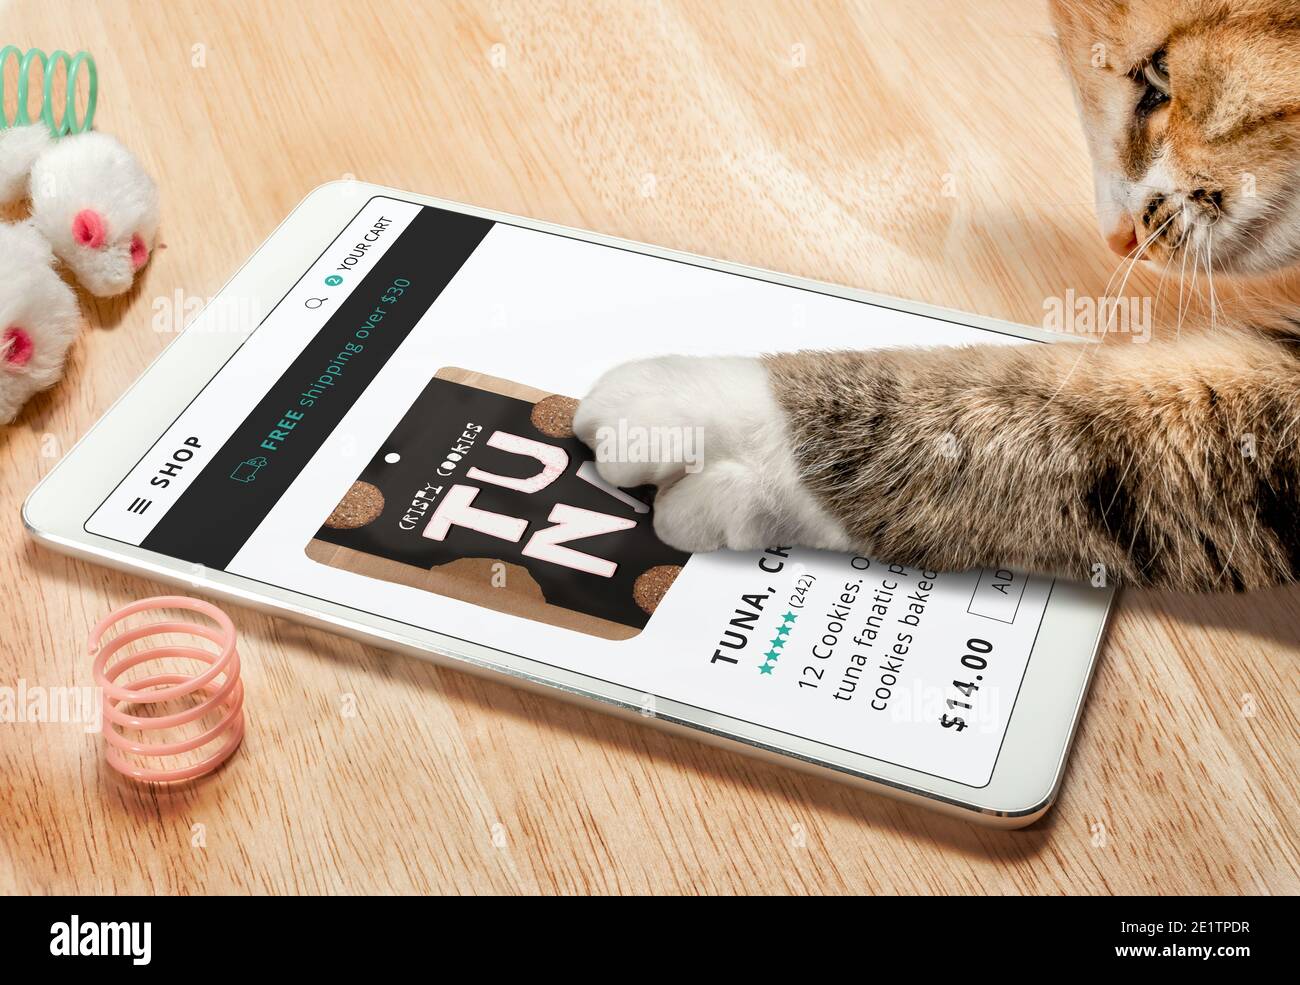 Smart cat ordering food using an online shopping website. The kitty is using tablet just like a human. Concept for pets using technology, e-commerce, Stock Photo